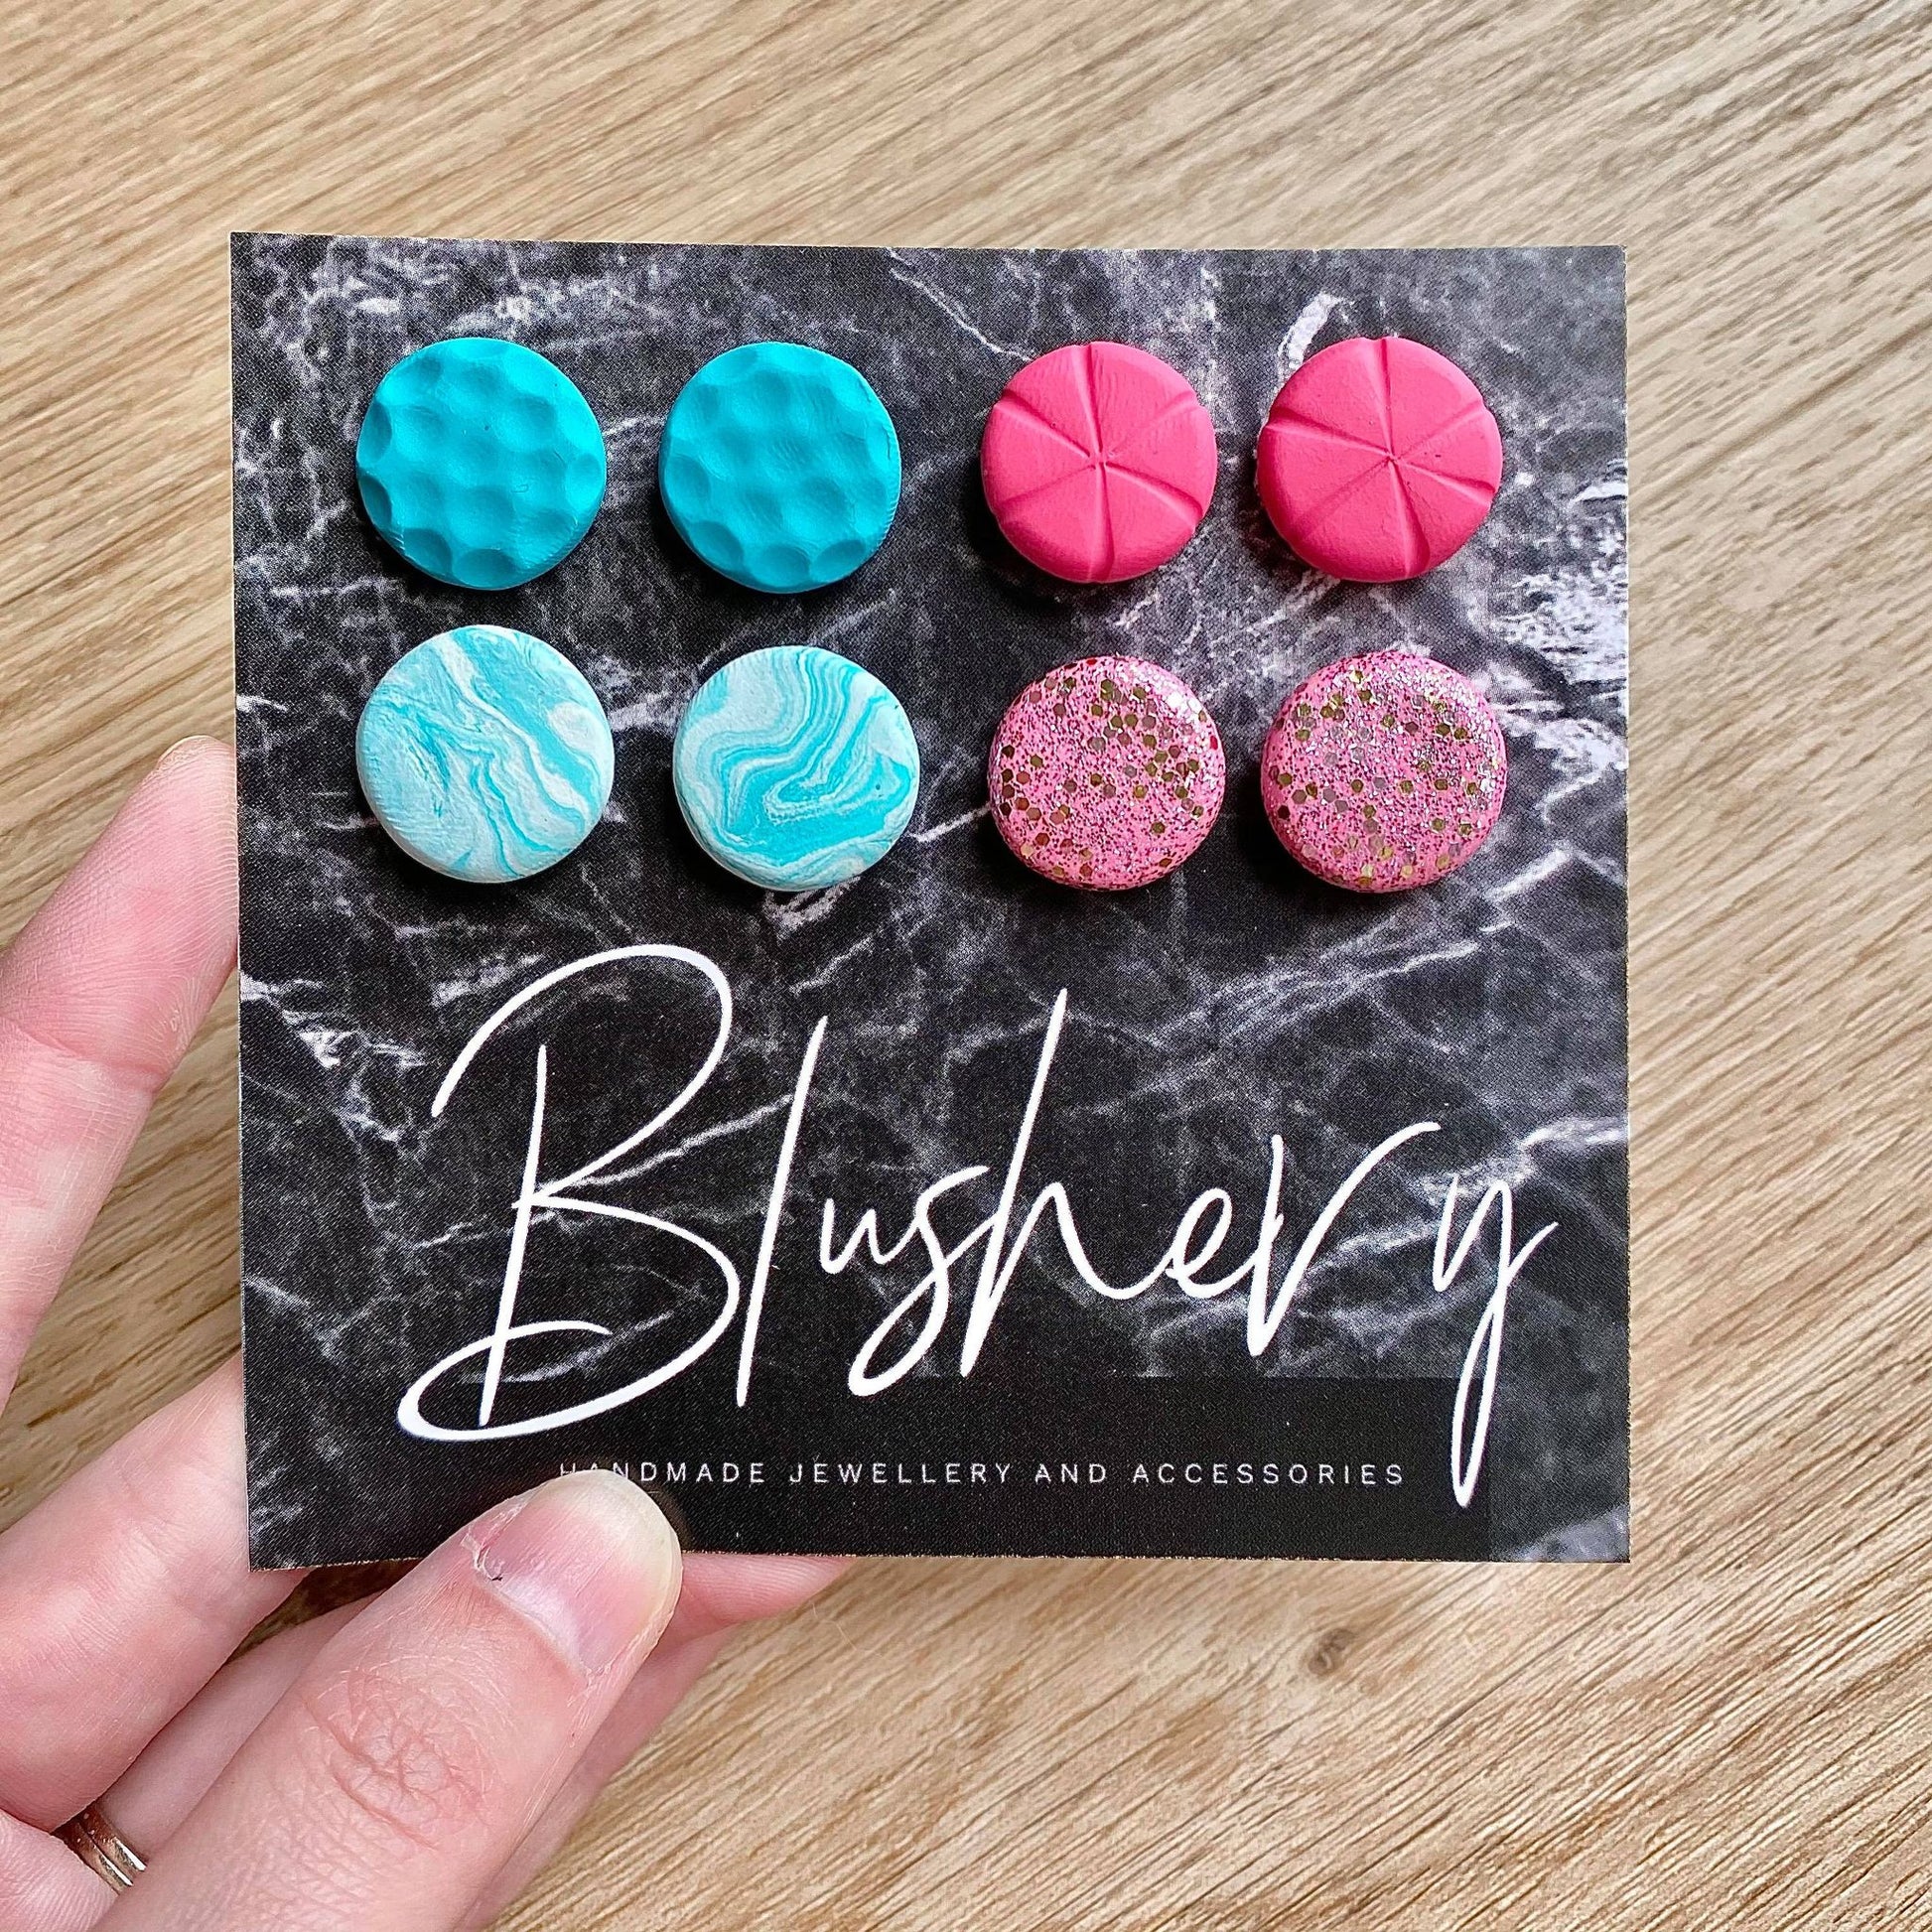 polymer clay stud earrings in bright teal and pink colours and textures